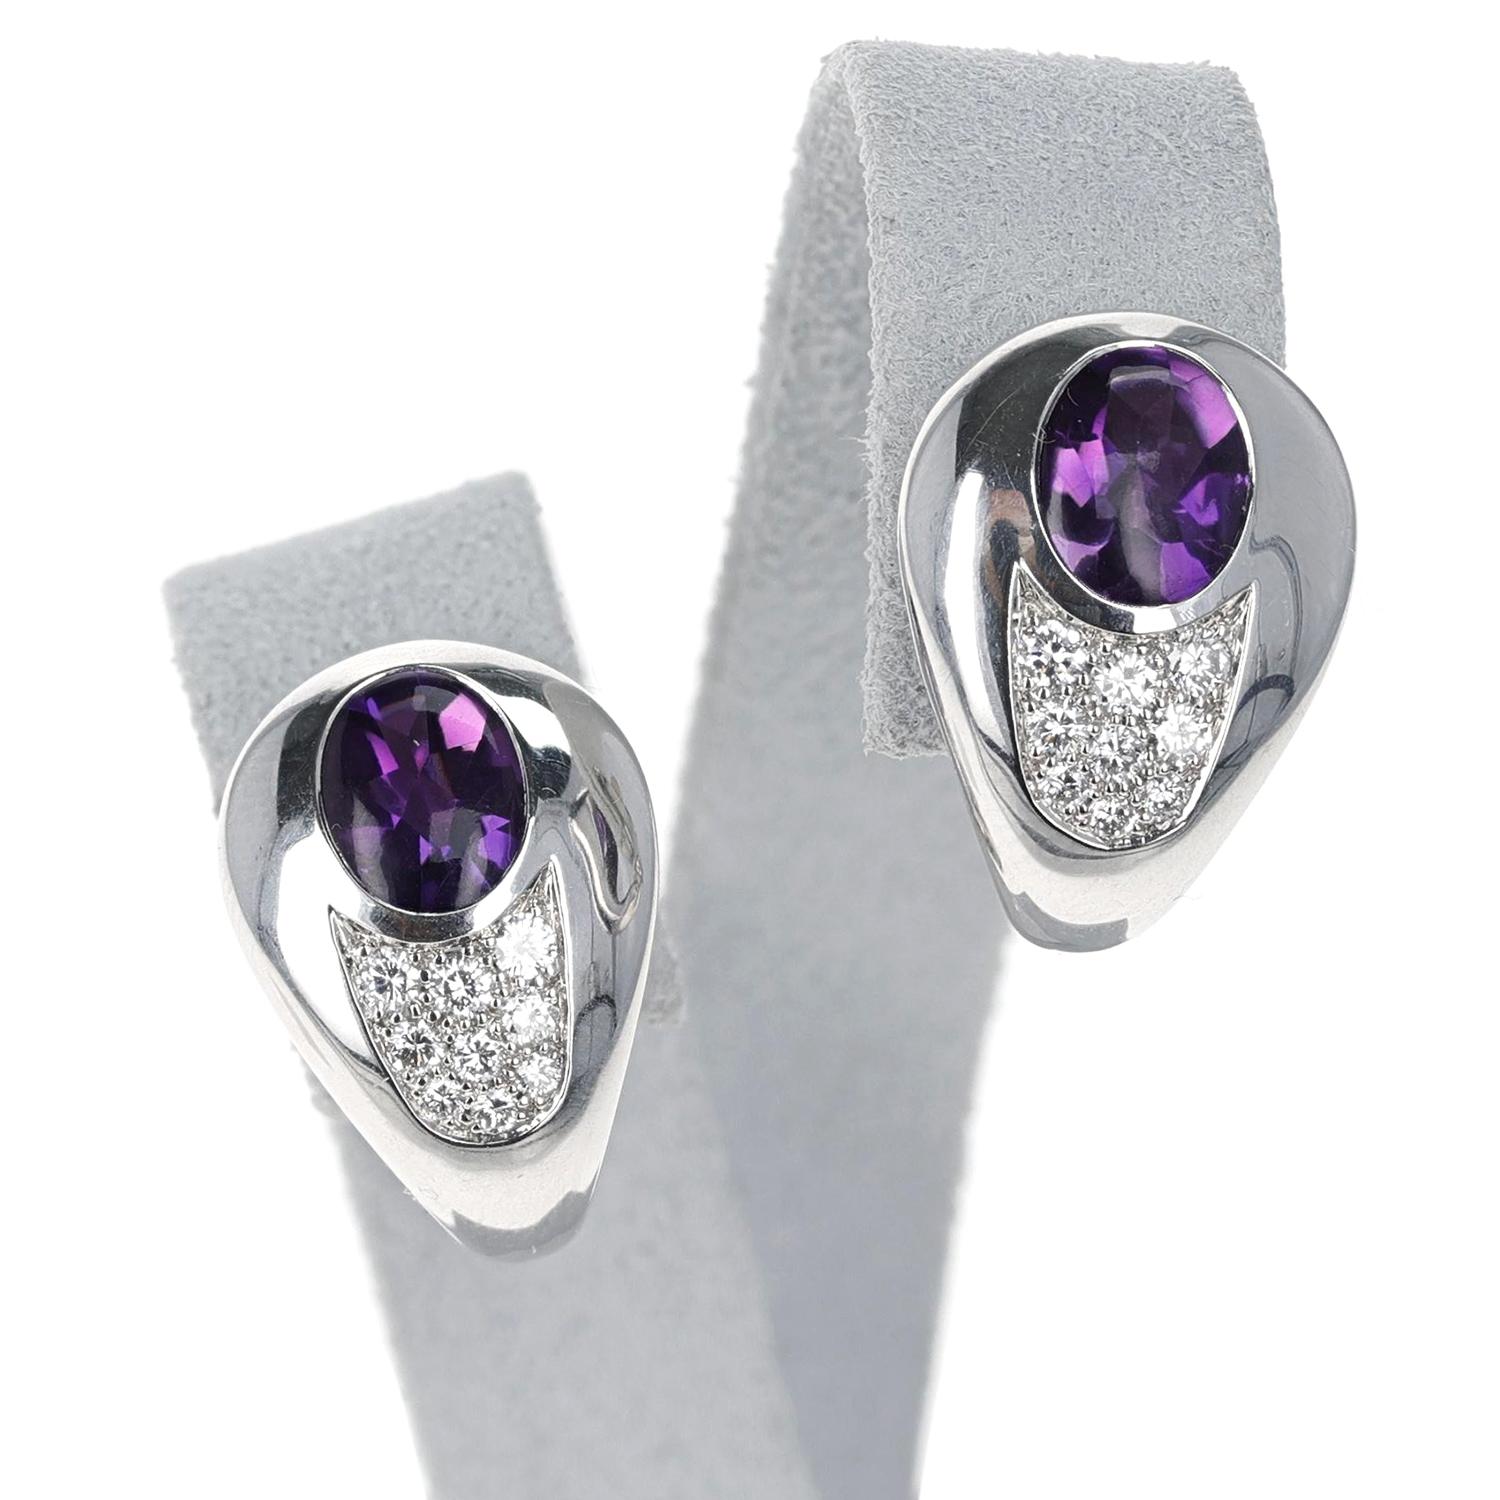 Mauboussin 2.20 ct. Amethyst and 0.42 ct. Diamond Earrings, 18K Gold For Sale 5